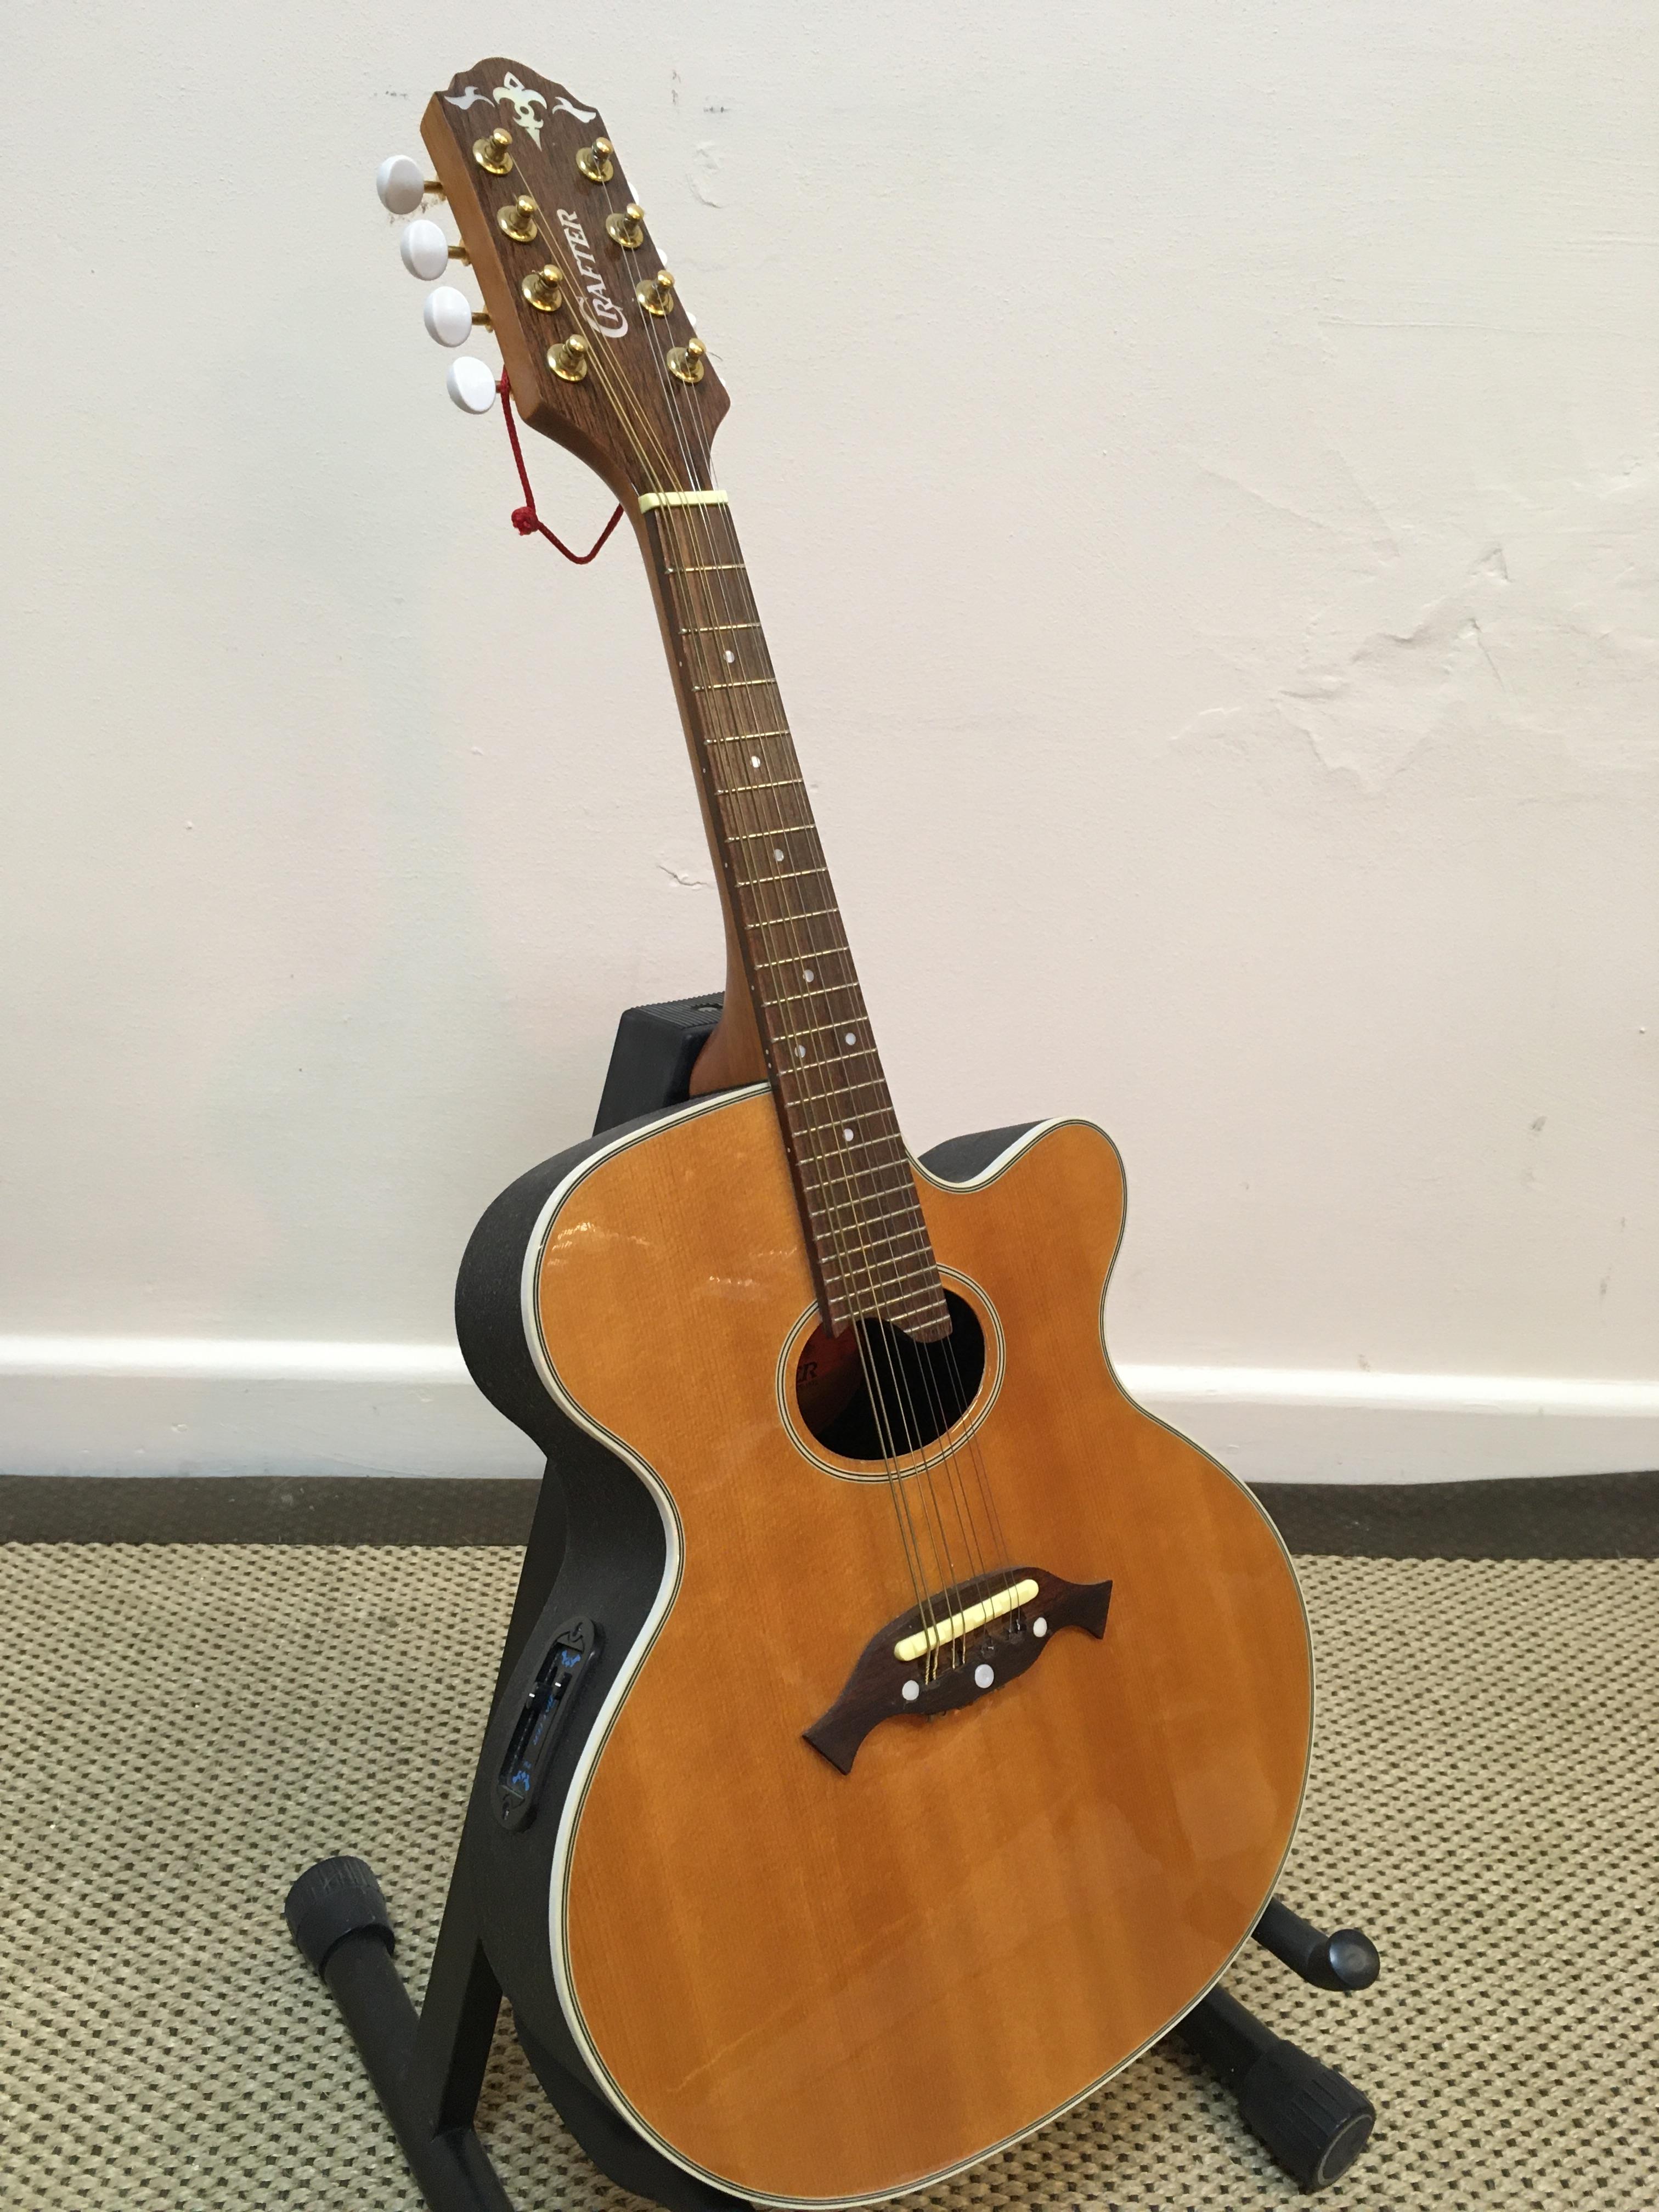 A Crafter model M70E semi acoustic mandolin eight string with cut away guitar body